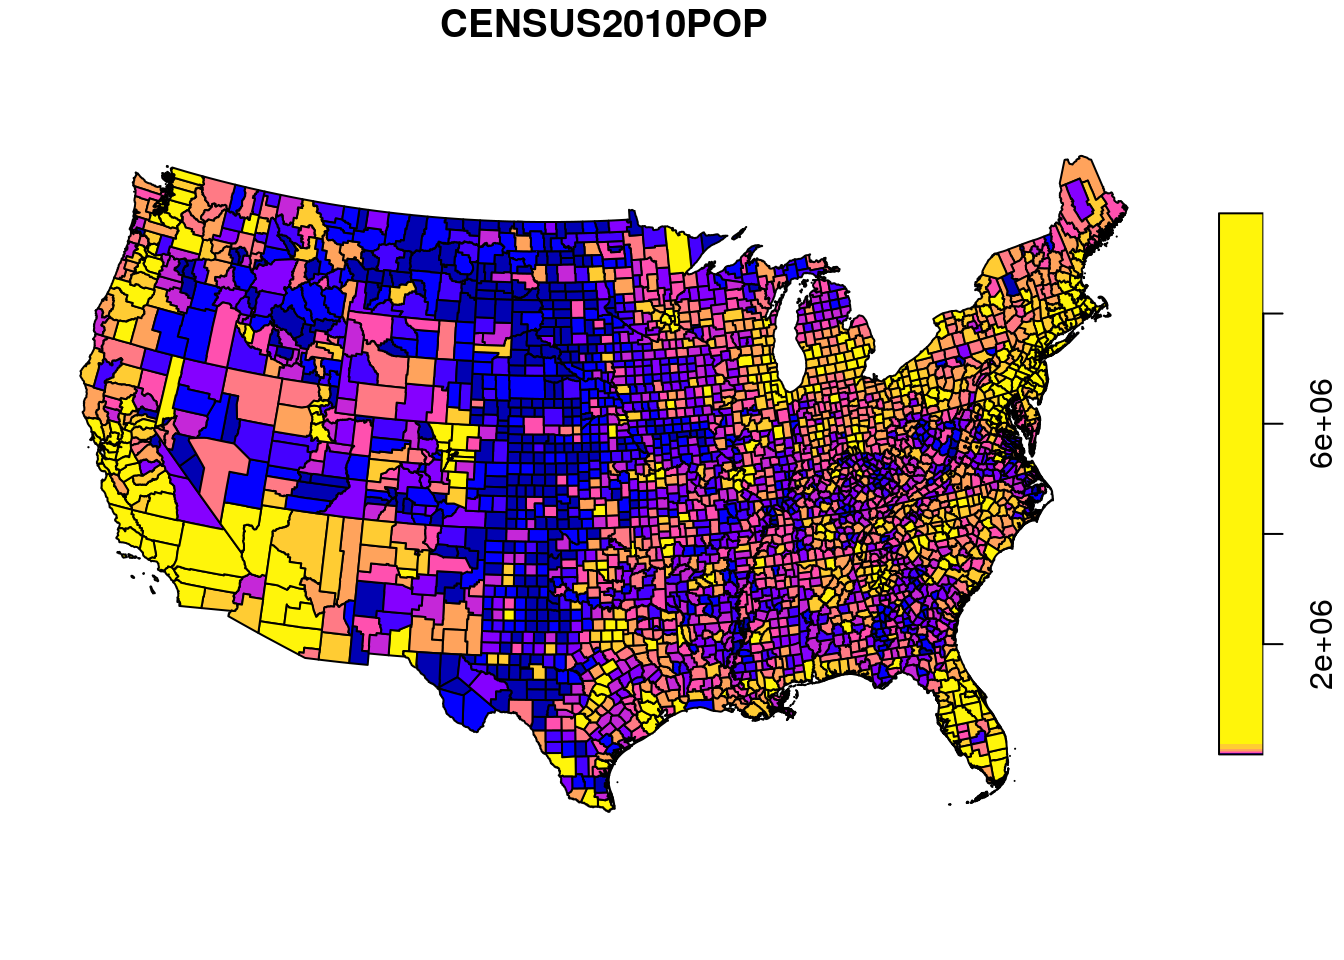 Population size per county in the US (quantile breaks)